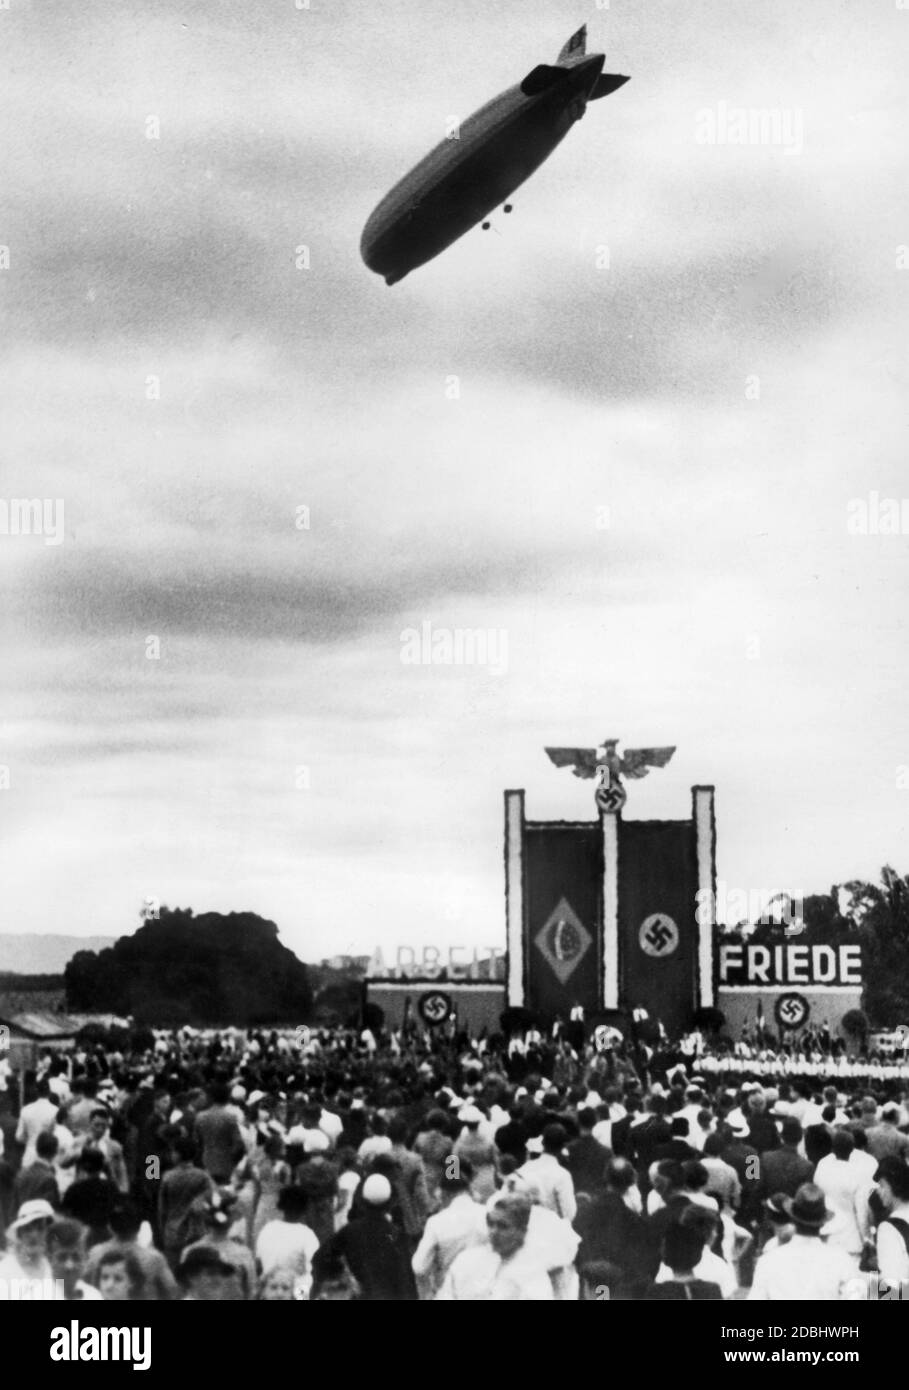 'The LZ 127 ''Graf Zeppelin'' is welcomed by the German colony in Rio de Janeiro, who celebrate the ''National Day of the German People'' for the third time on the square of the Deutscher Turn und Sportverein. On the grandstand, which is decorated with the national flag of Brazil as well as the swastika flag and the symbols of sovereignty of the German Empire, the words ''Work'' and ''Peace'' are written with oversized letters.' Stock Photo